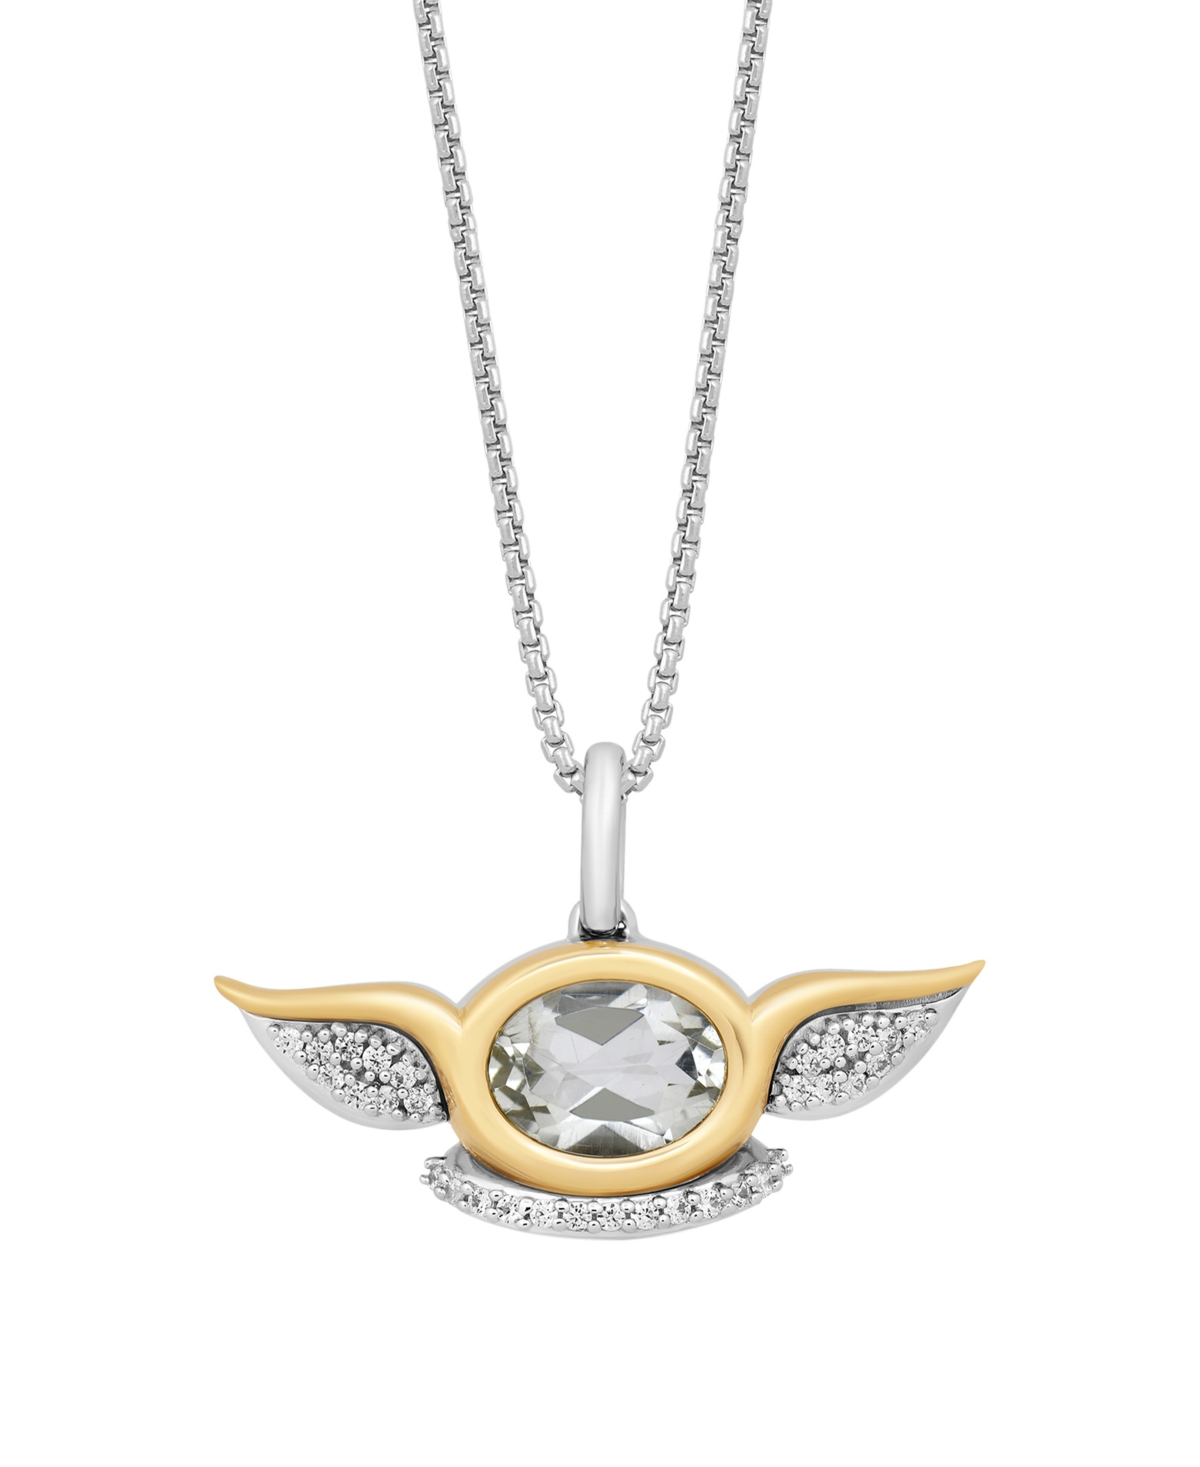 Grogua Diamond and Green Quartz Pendant Necklace (1/10 ct. t.w.) in 10K Yellow Gold and Sterling Silver - Two Tone